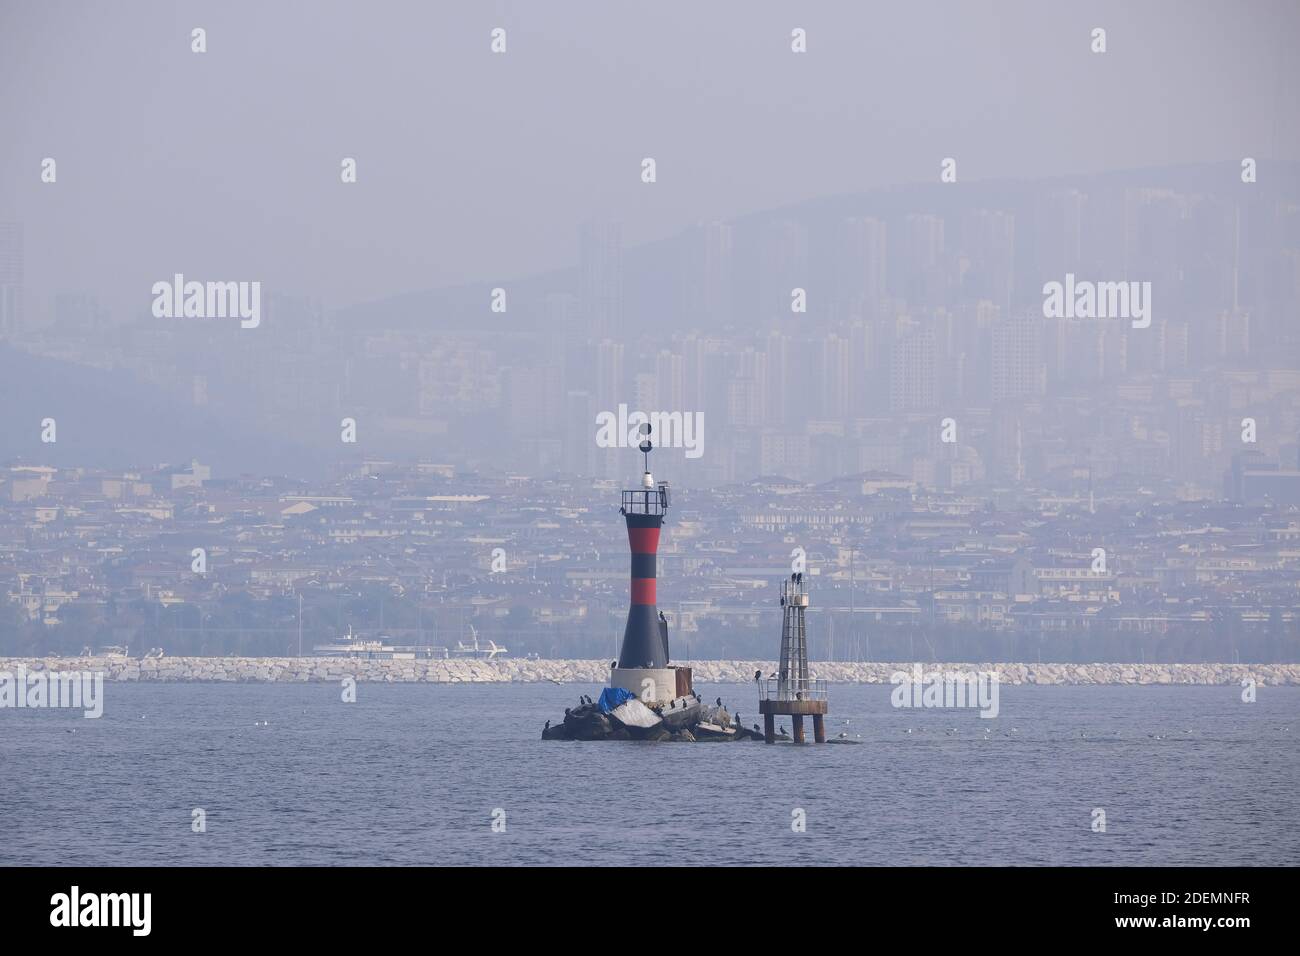 A marine rocky warning light, cityscape and seabirds in a foggy day. This little lighthouse is close to coast at Istanbul, Kartal. Stock Photo